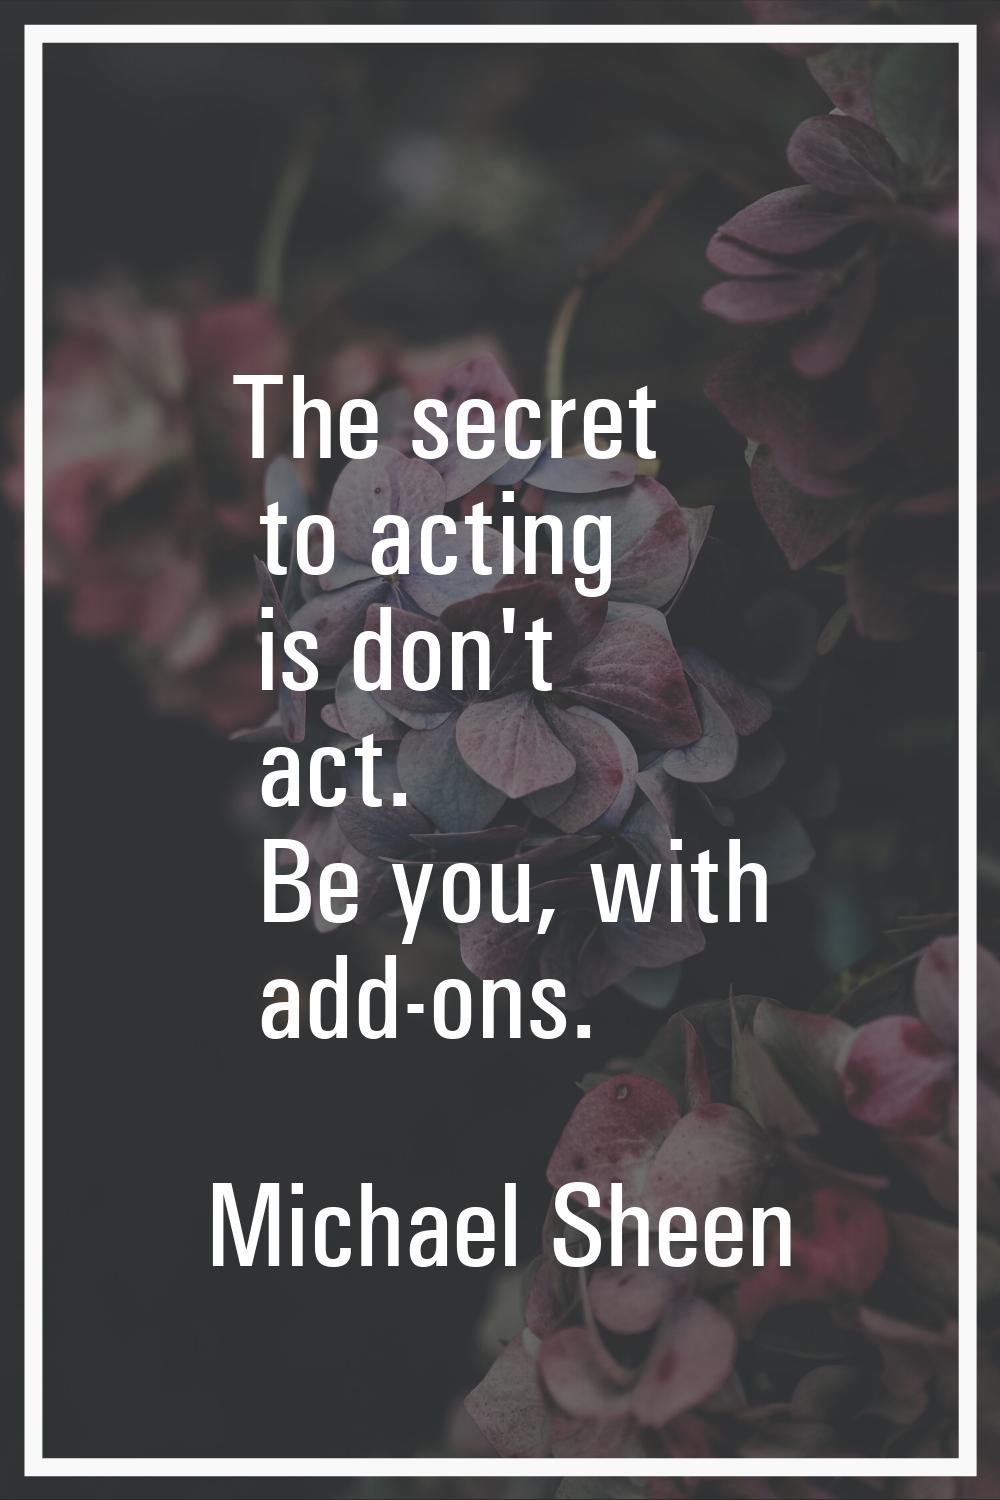 The secret to acting is don't act. Be you, with add-ons.